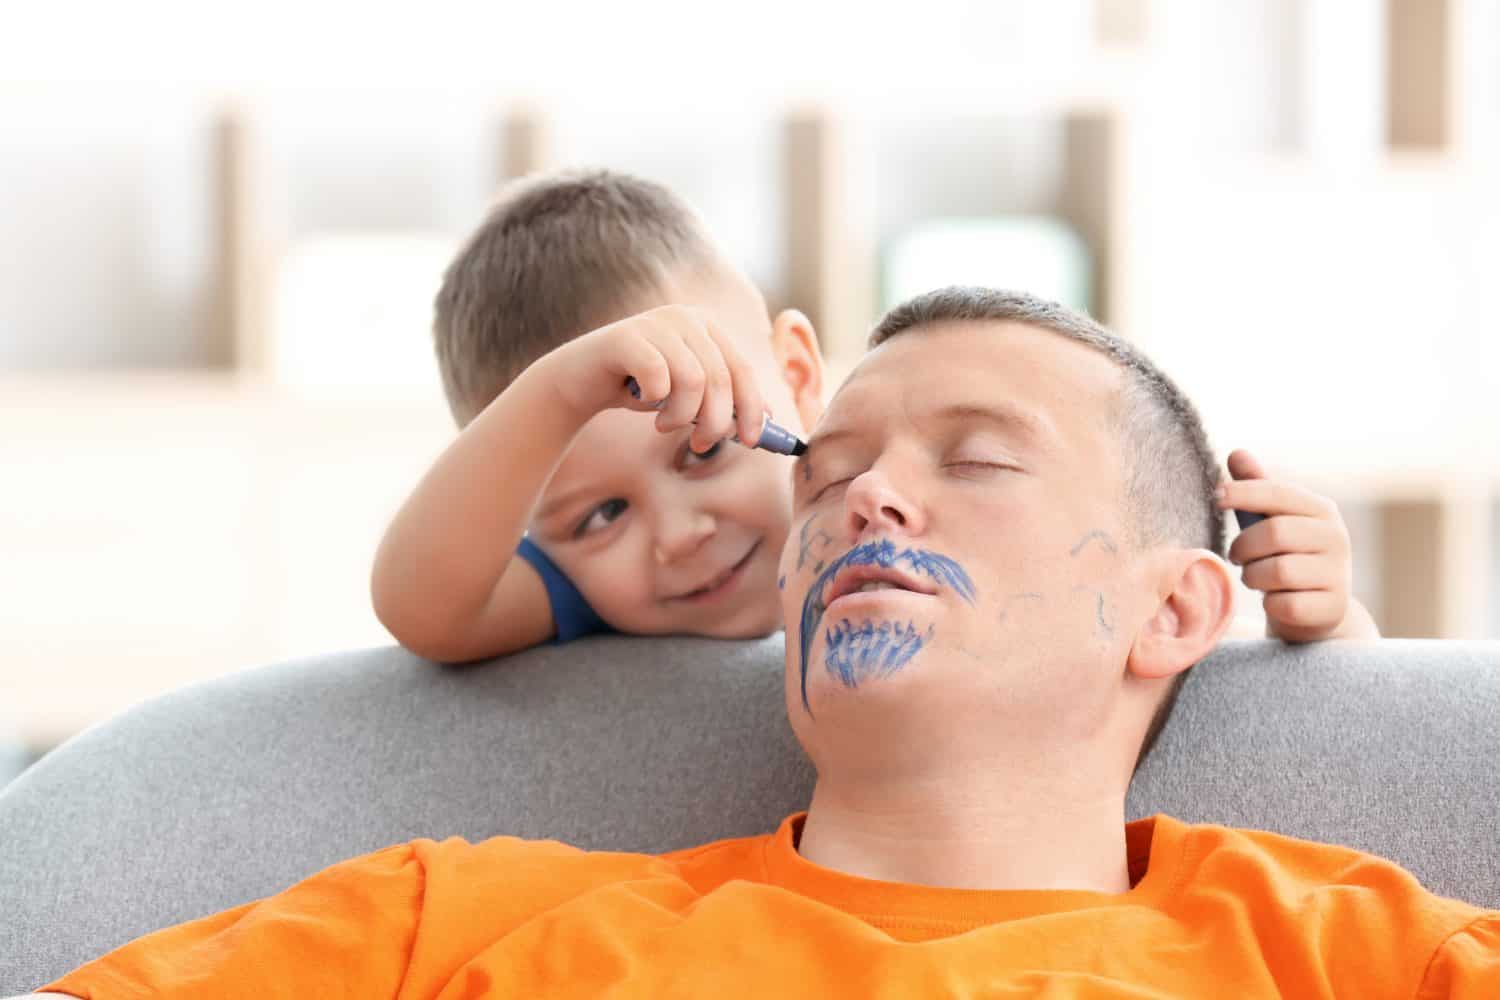 Little boy painting his father's face while he sleeping. April fool's day prank